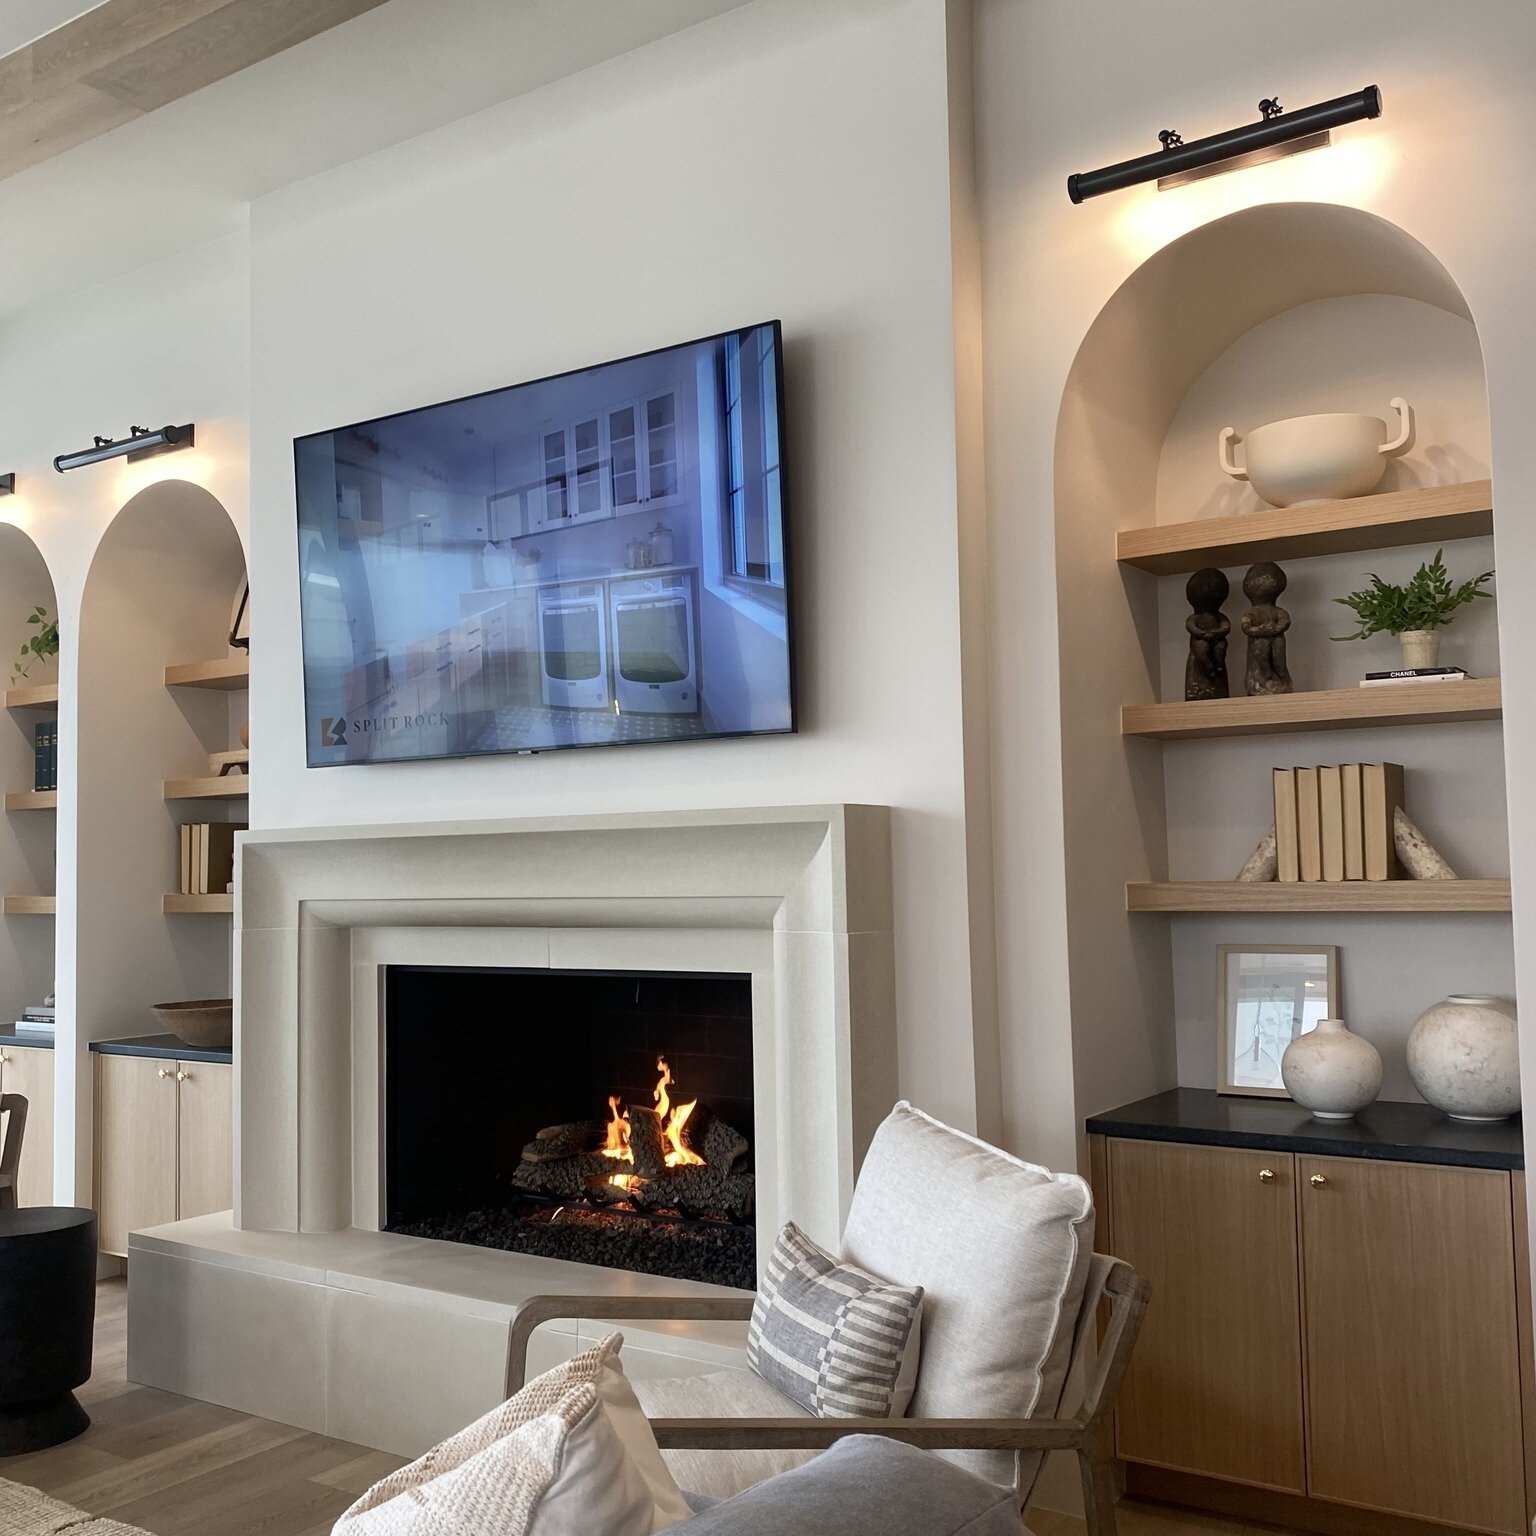 Promise of Perfect Warmth. From concept to reality, we're your partner in creating a dream fireplace. Warm, stylish, and perfect for your home - that's our promise. #FromConceptToReality💡

#sweepsnladders #fireplacerenovation #chimneysweeper  #firep